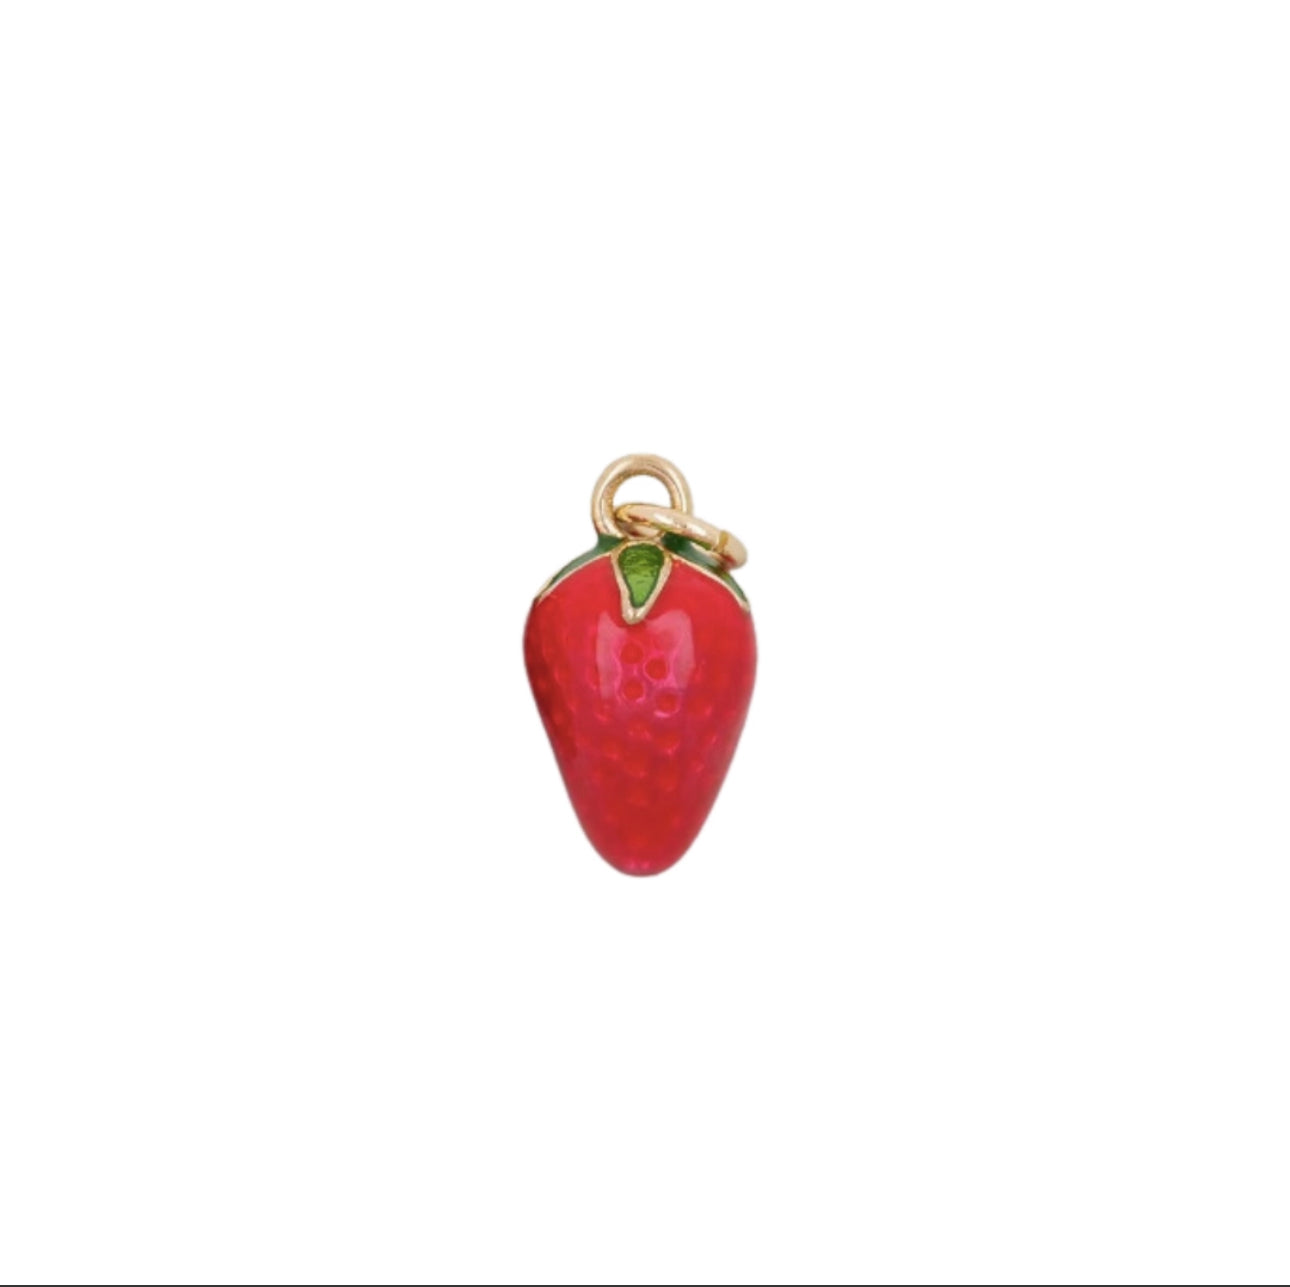 14K GOLD FILLED STRAWBERRY CHARM